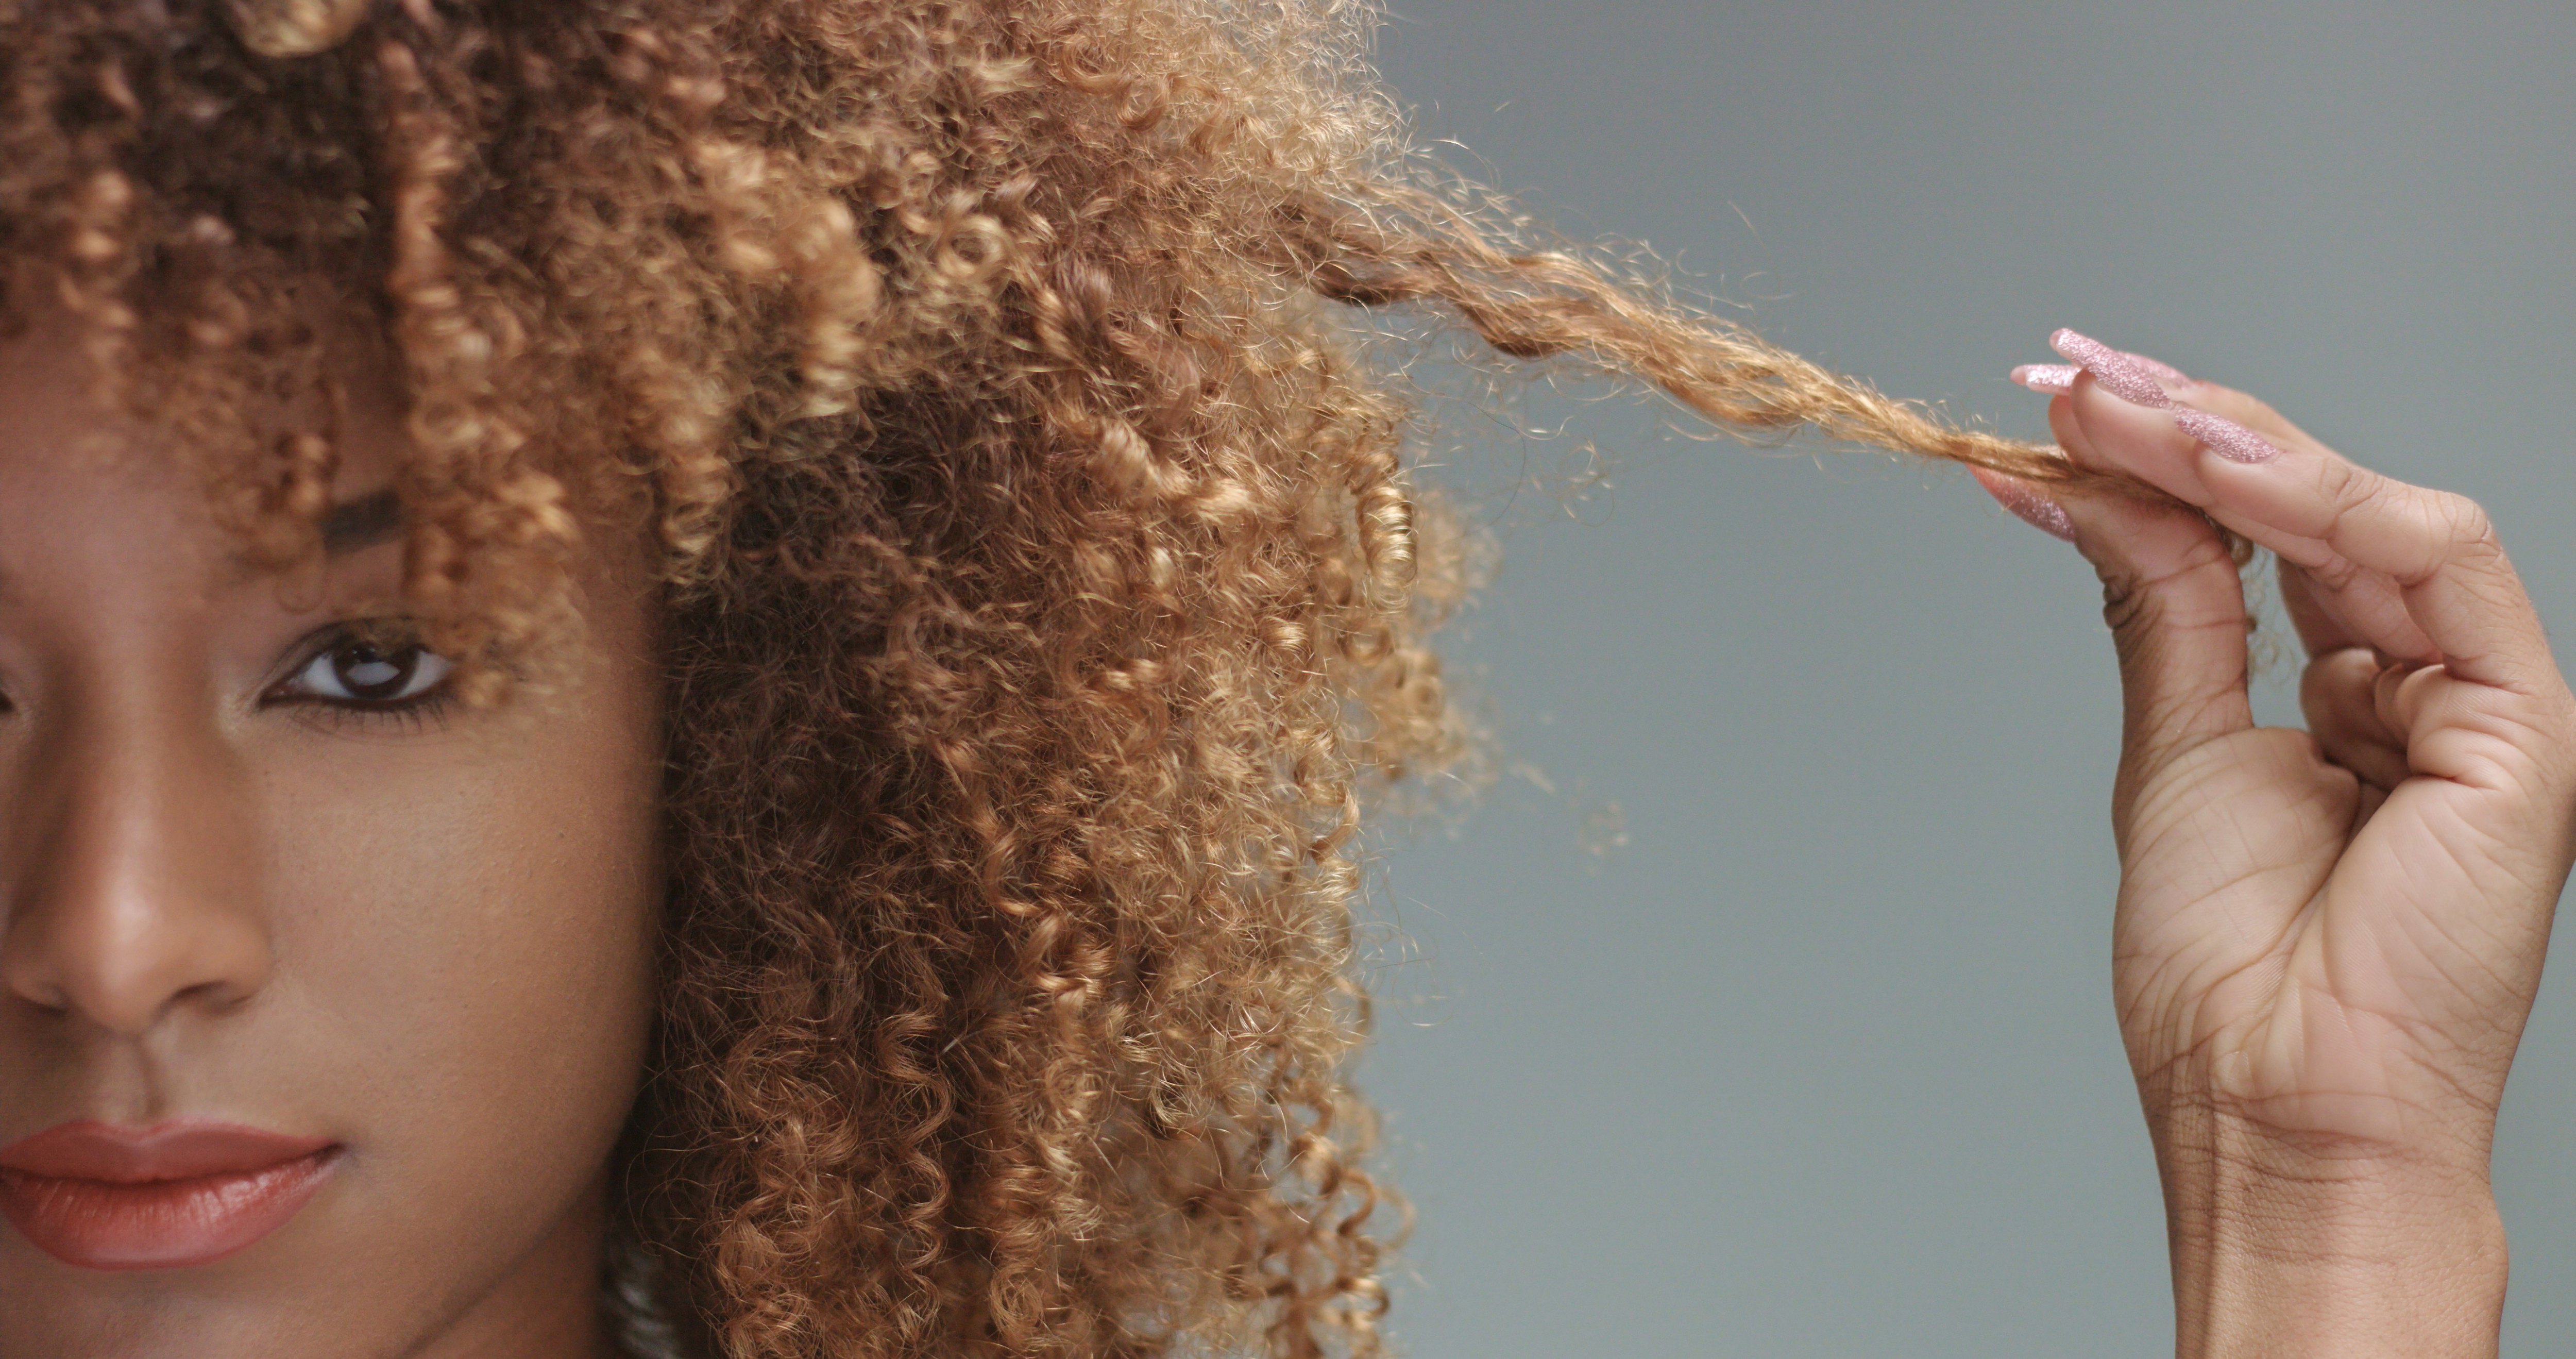 Curly haired woman pulling one curl straight out to the side